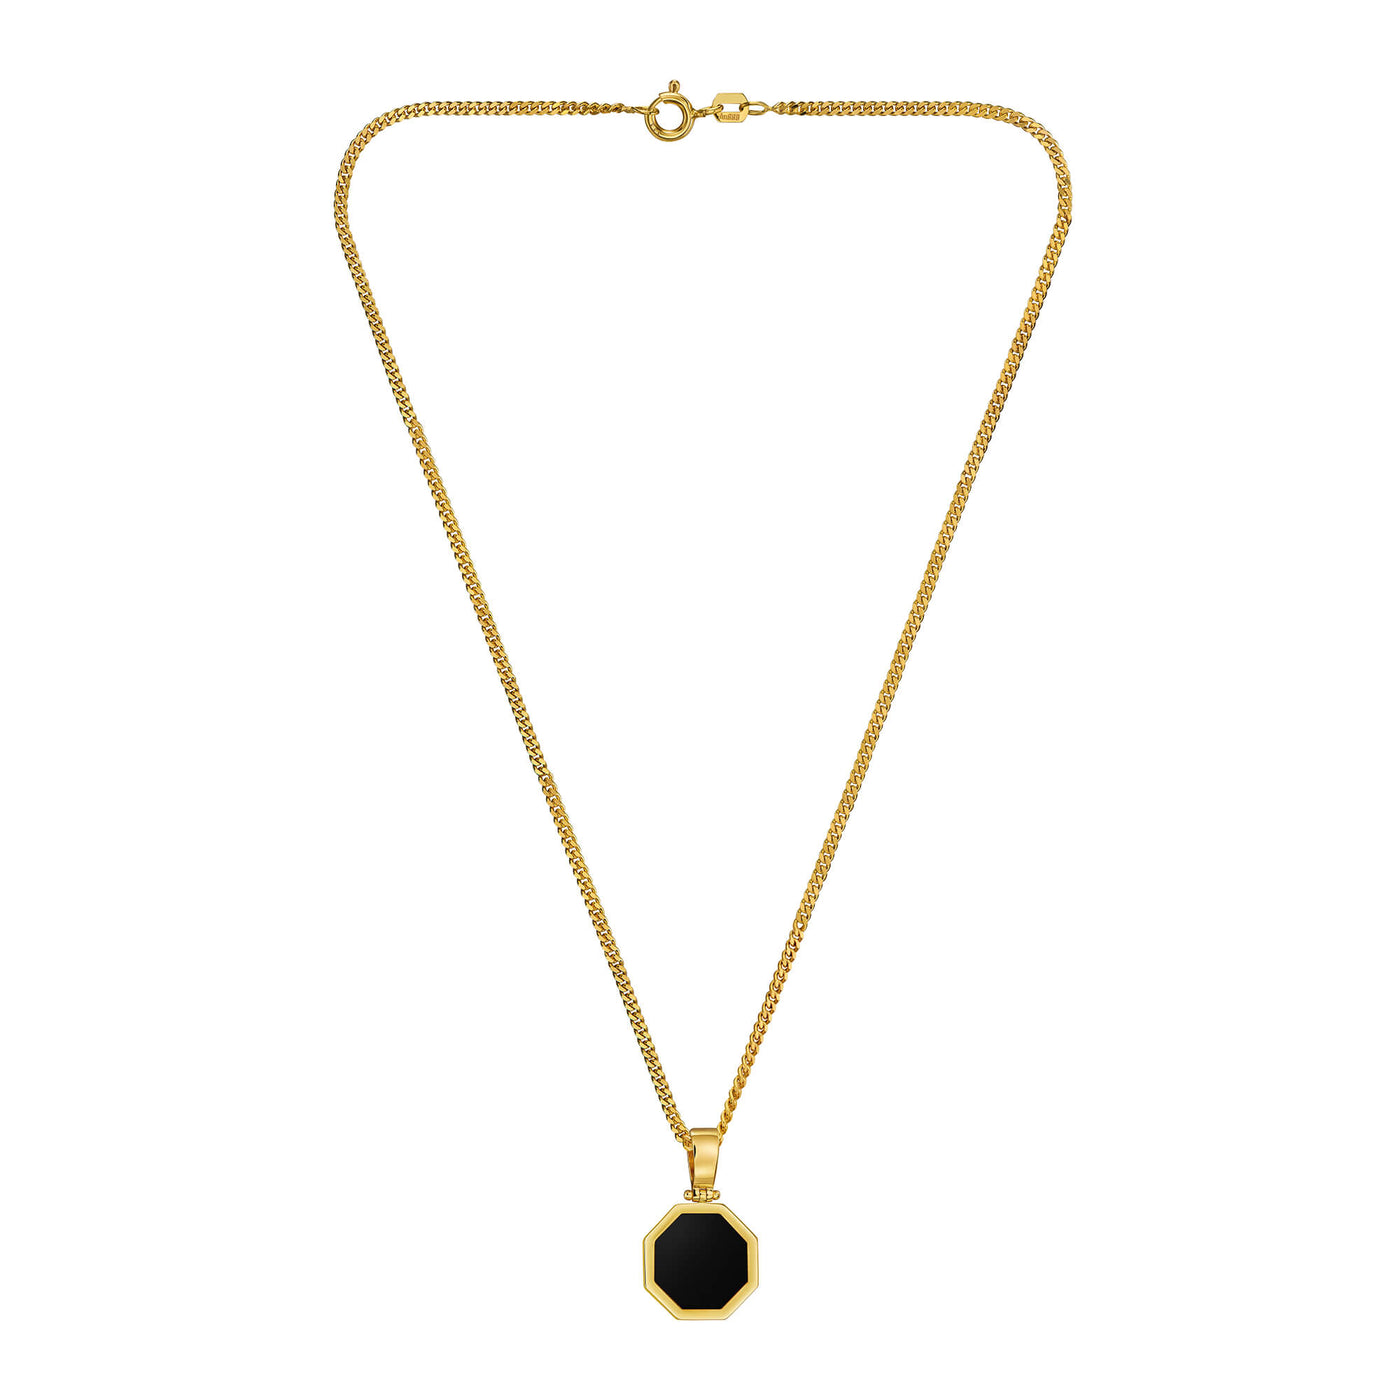 ONYX OCTAGON NECKLACE 585 GOLD